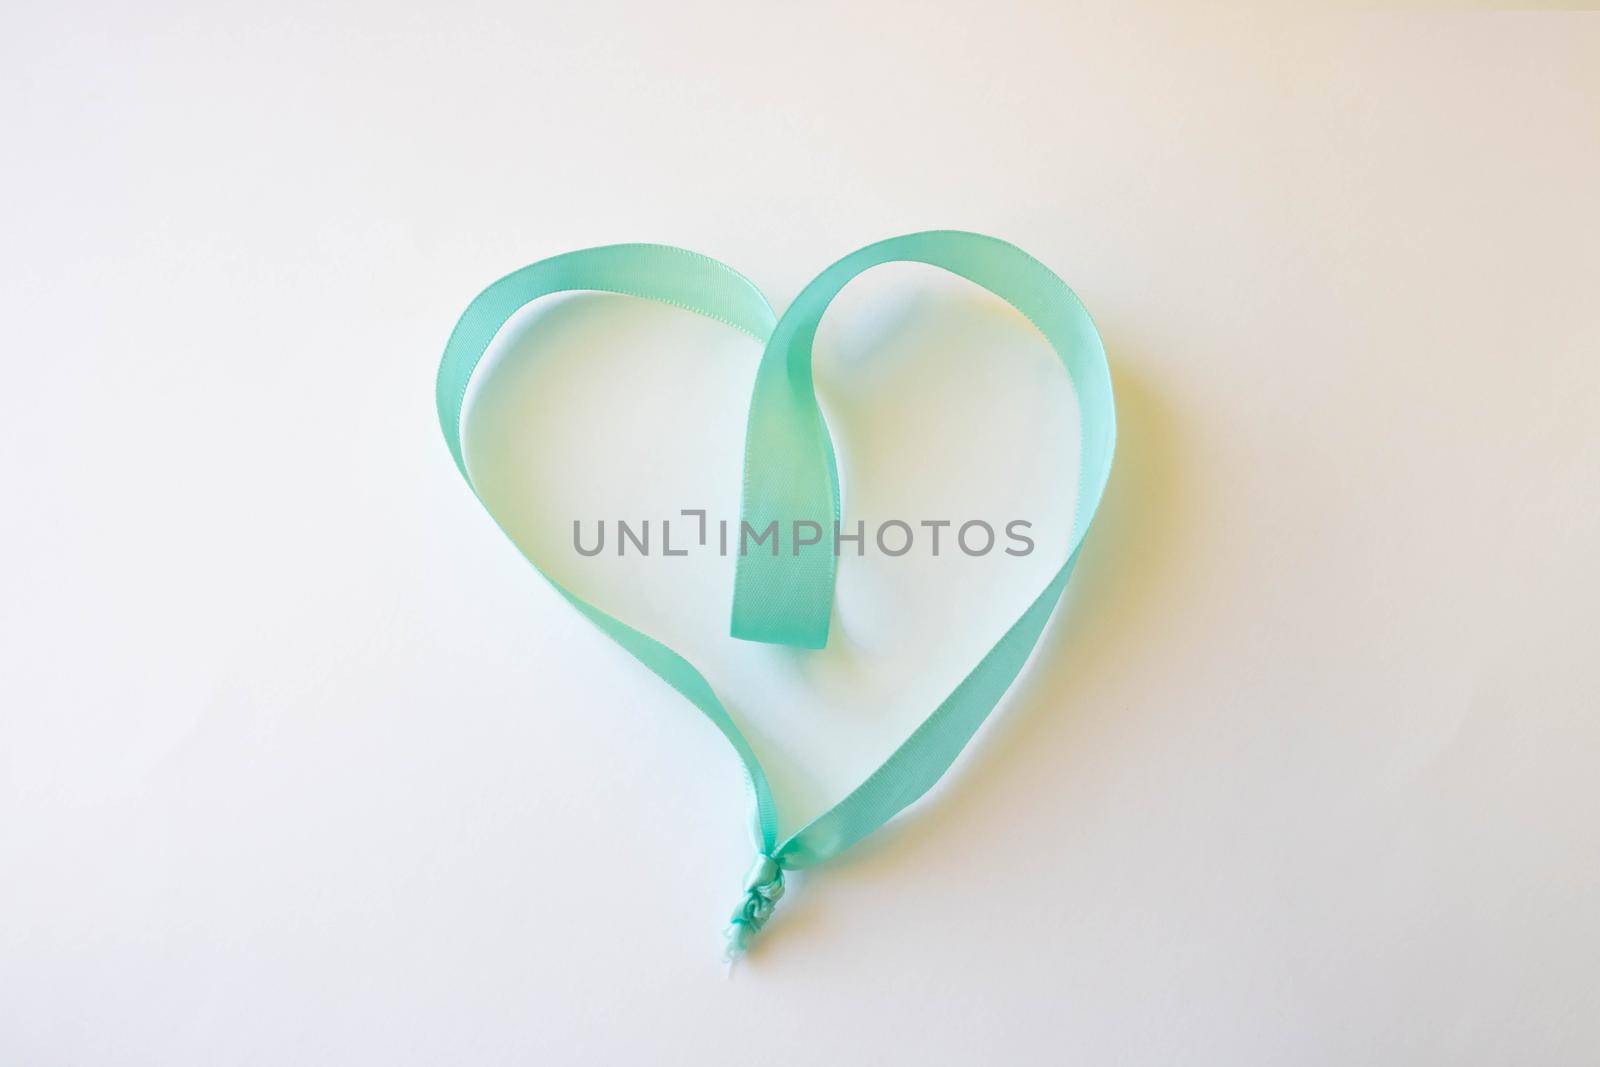 Happy Valentine's Day. A heart made of blue ribbon on a white background. Valentine's Day Concept.